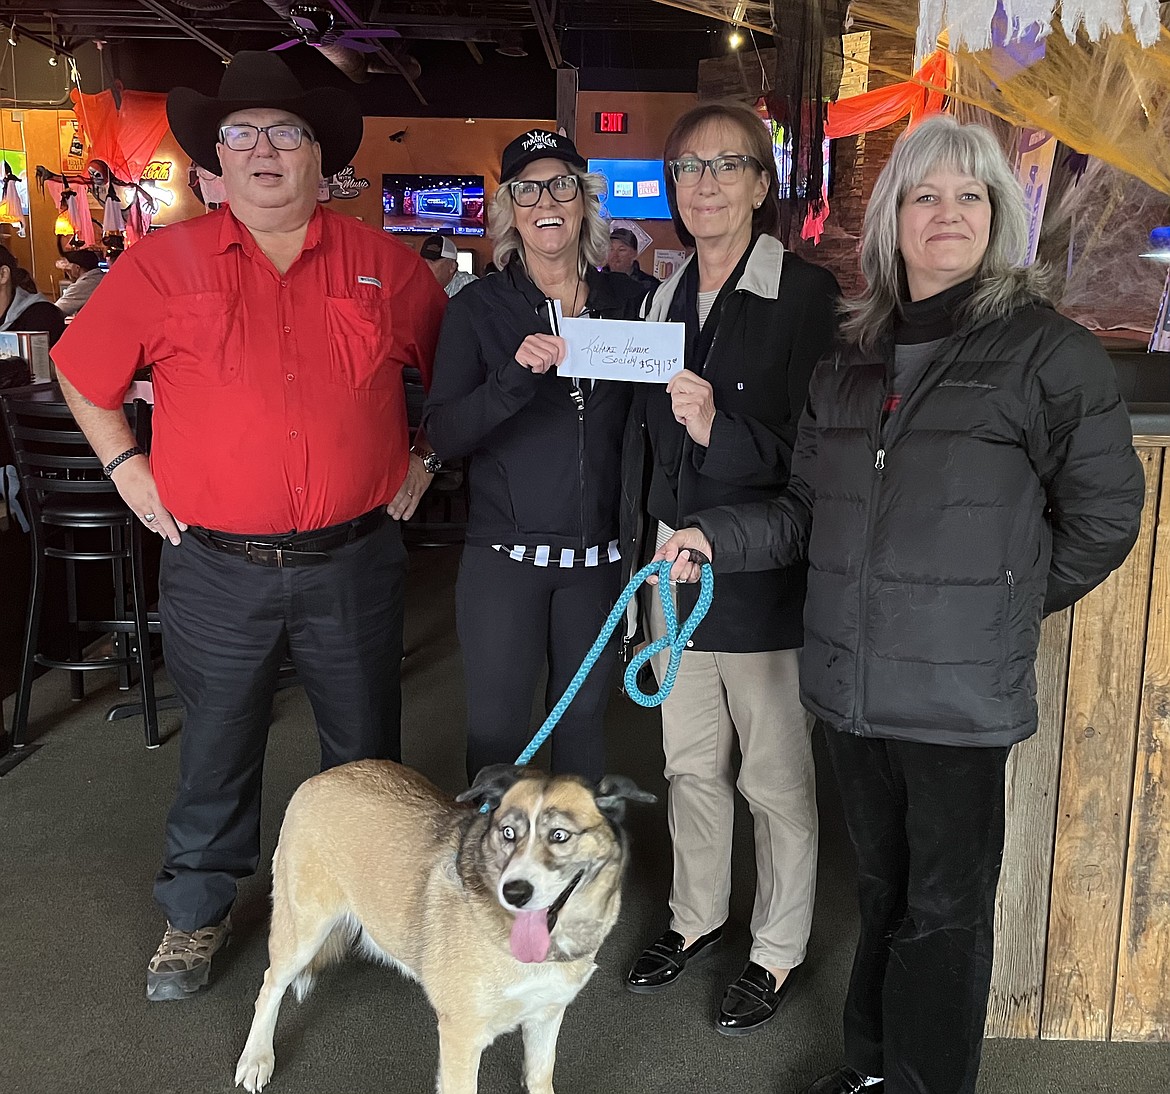 Companions Animal Center, formally Kootenai Humane Society, received a donation of $5,413 from the Dog Days of Summer event conducted at Rusty's Sports Bar in Hayden. The funds go directly to the center's medical relief program to help with the cost of drugs and supplys. From left: Dean Opsal, Southern Glazers Voluncheers Ambassador for Idaho; Kelly Jo Arnold, GM Rusty's Sports Bar; Vicky Nelson and Anime Parisot, Companions Animal Center shelter; and Shirley, a female shepherd mix. She is sweet, friendly and is in need a good home.